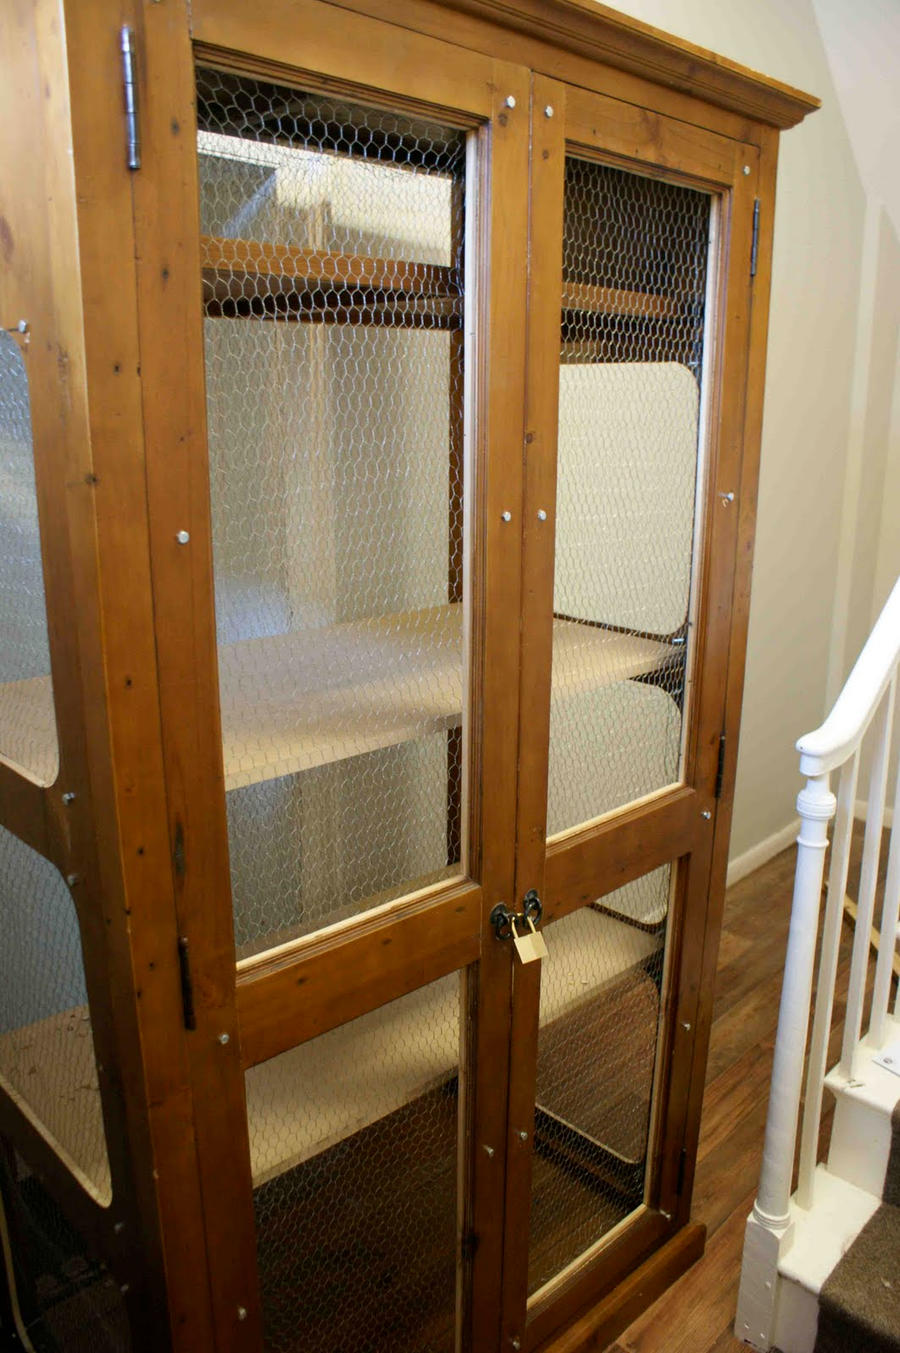 Antique wardrobe adapted